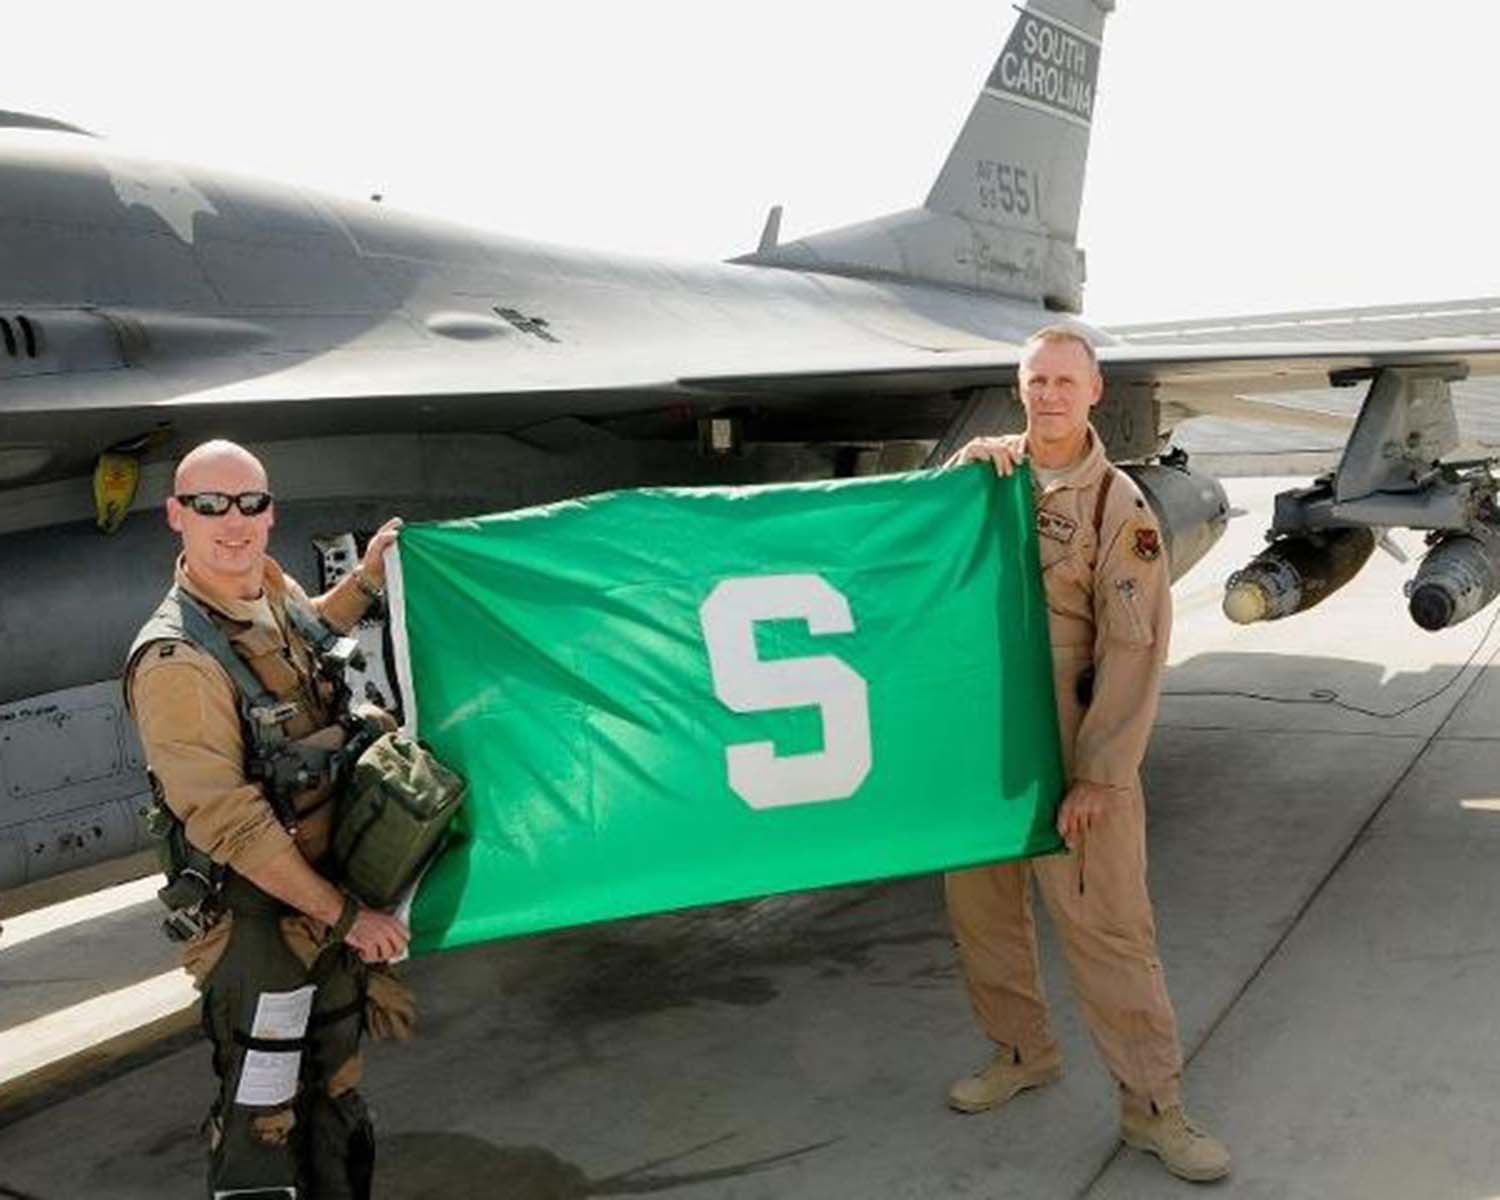 Thomas Watts and other pilot with MSU flag in front of airplane